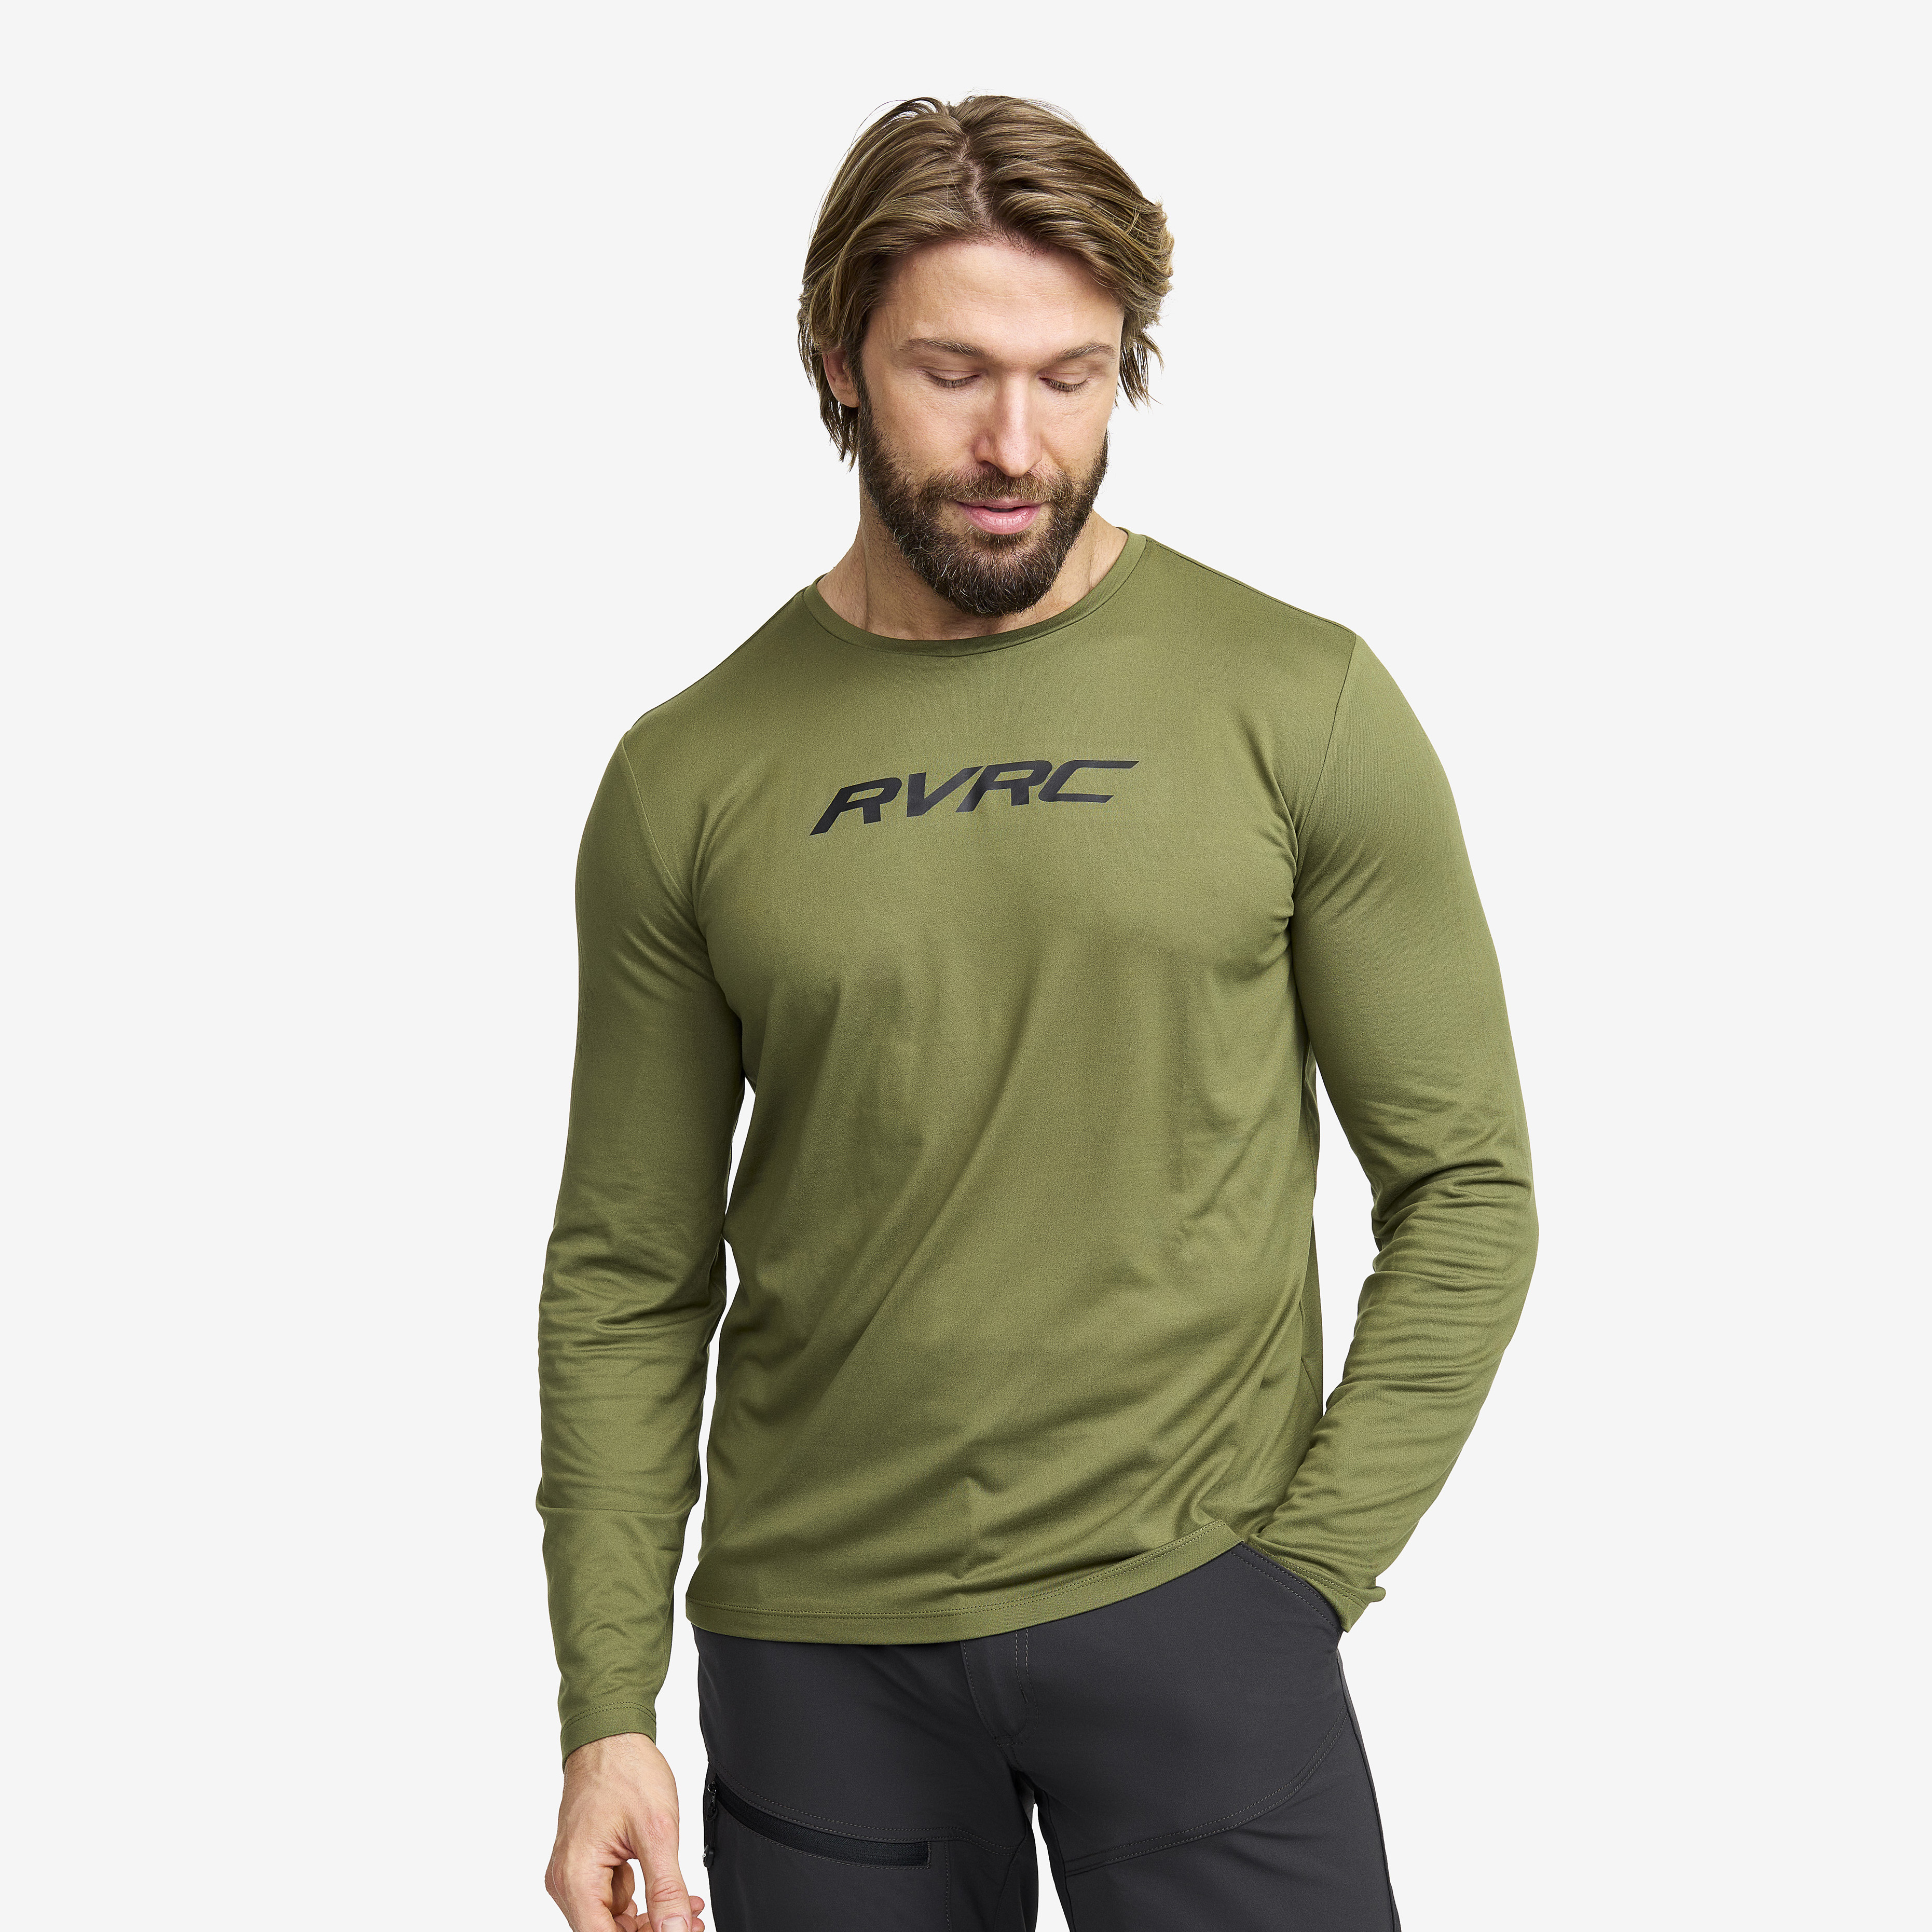 Mission Logo Long-sleeved T-shirt Cypress Hombres